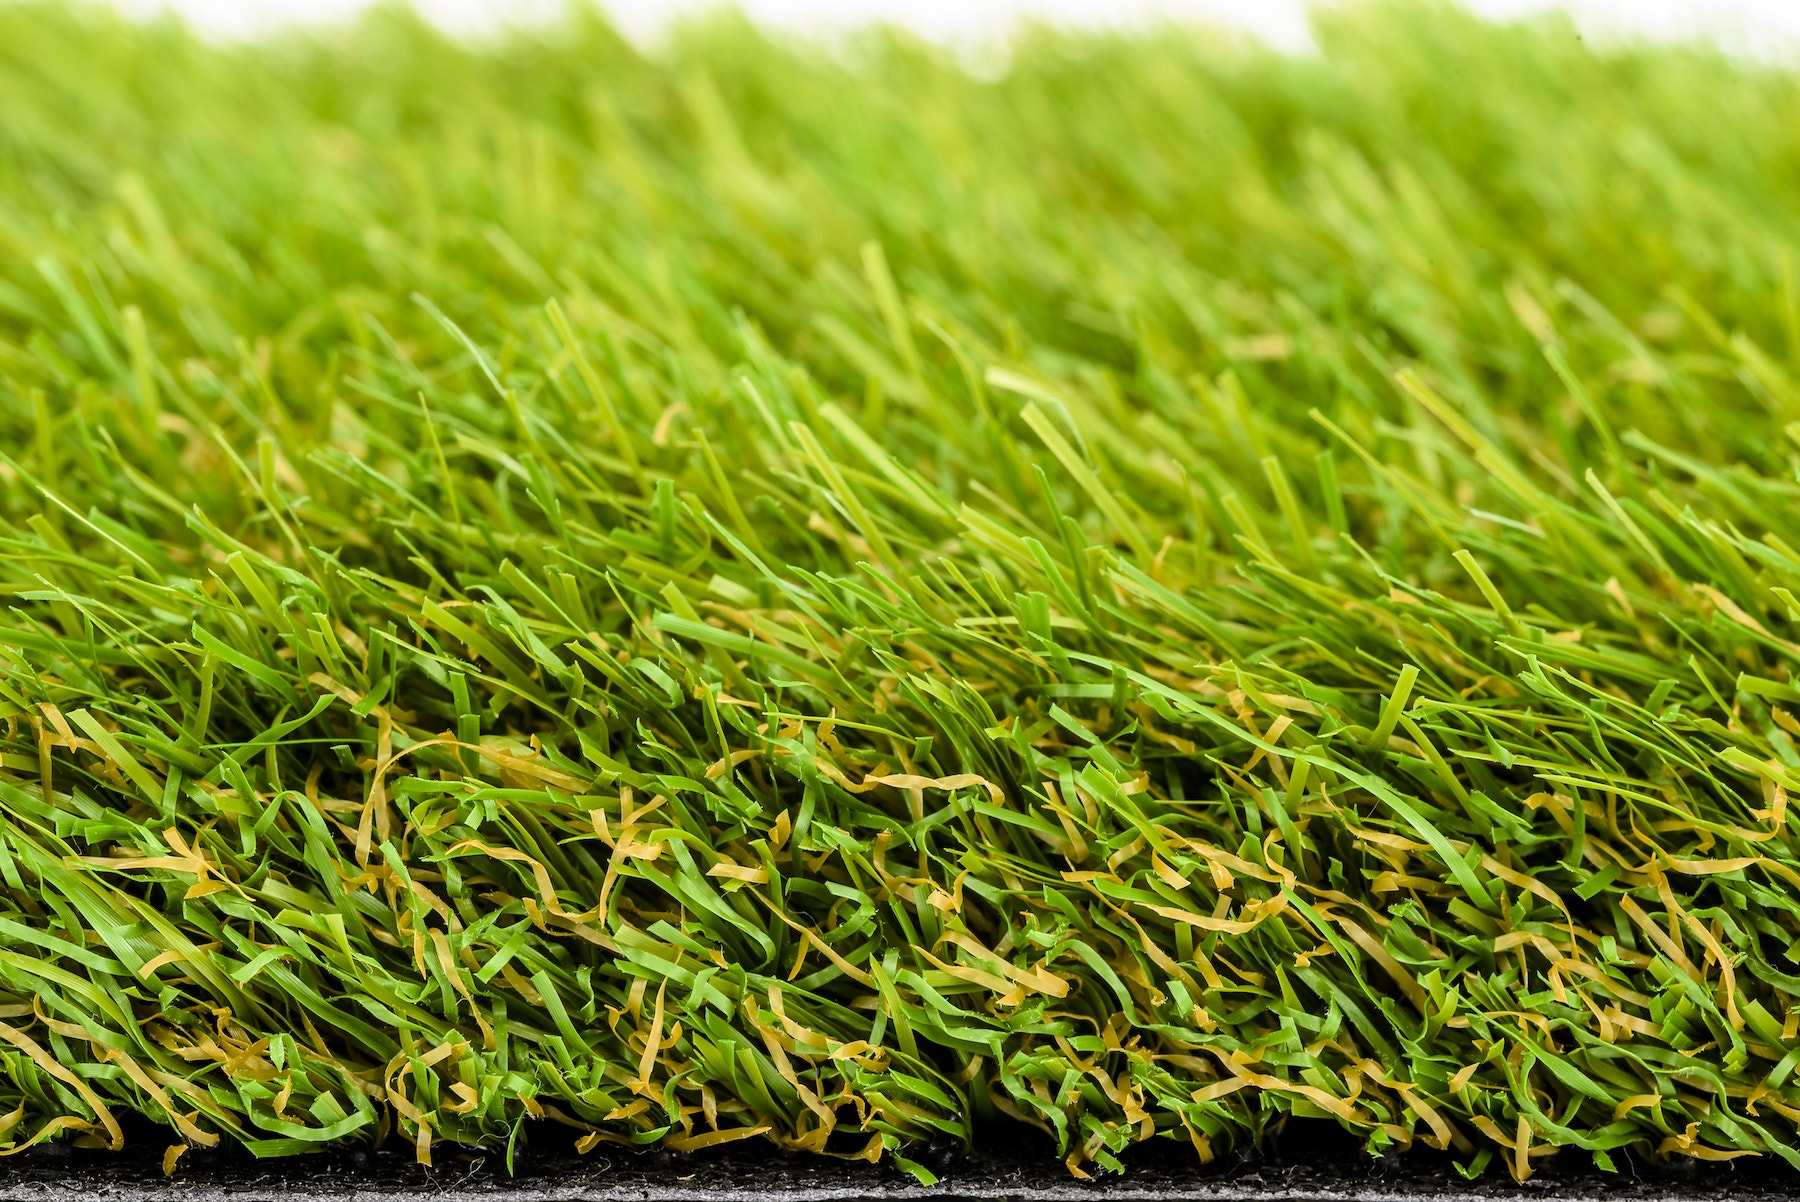 Buy Carnoustie Artificial Grass online at Artificial Grass For Less